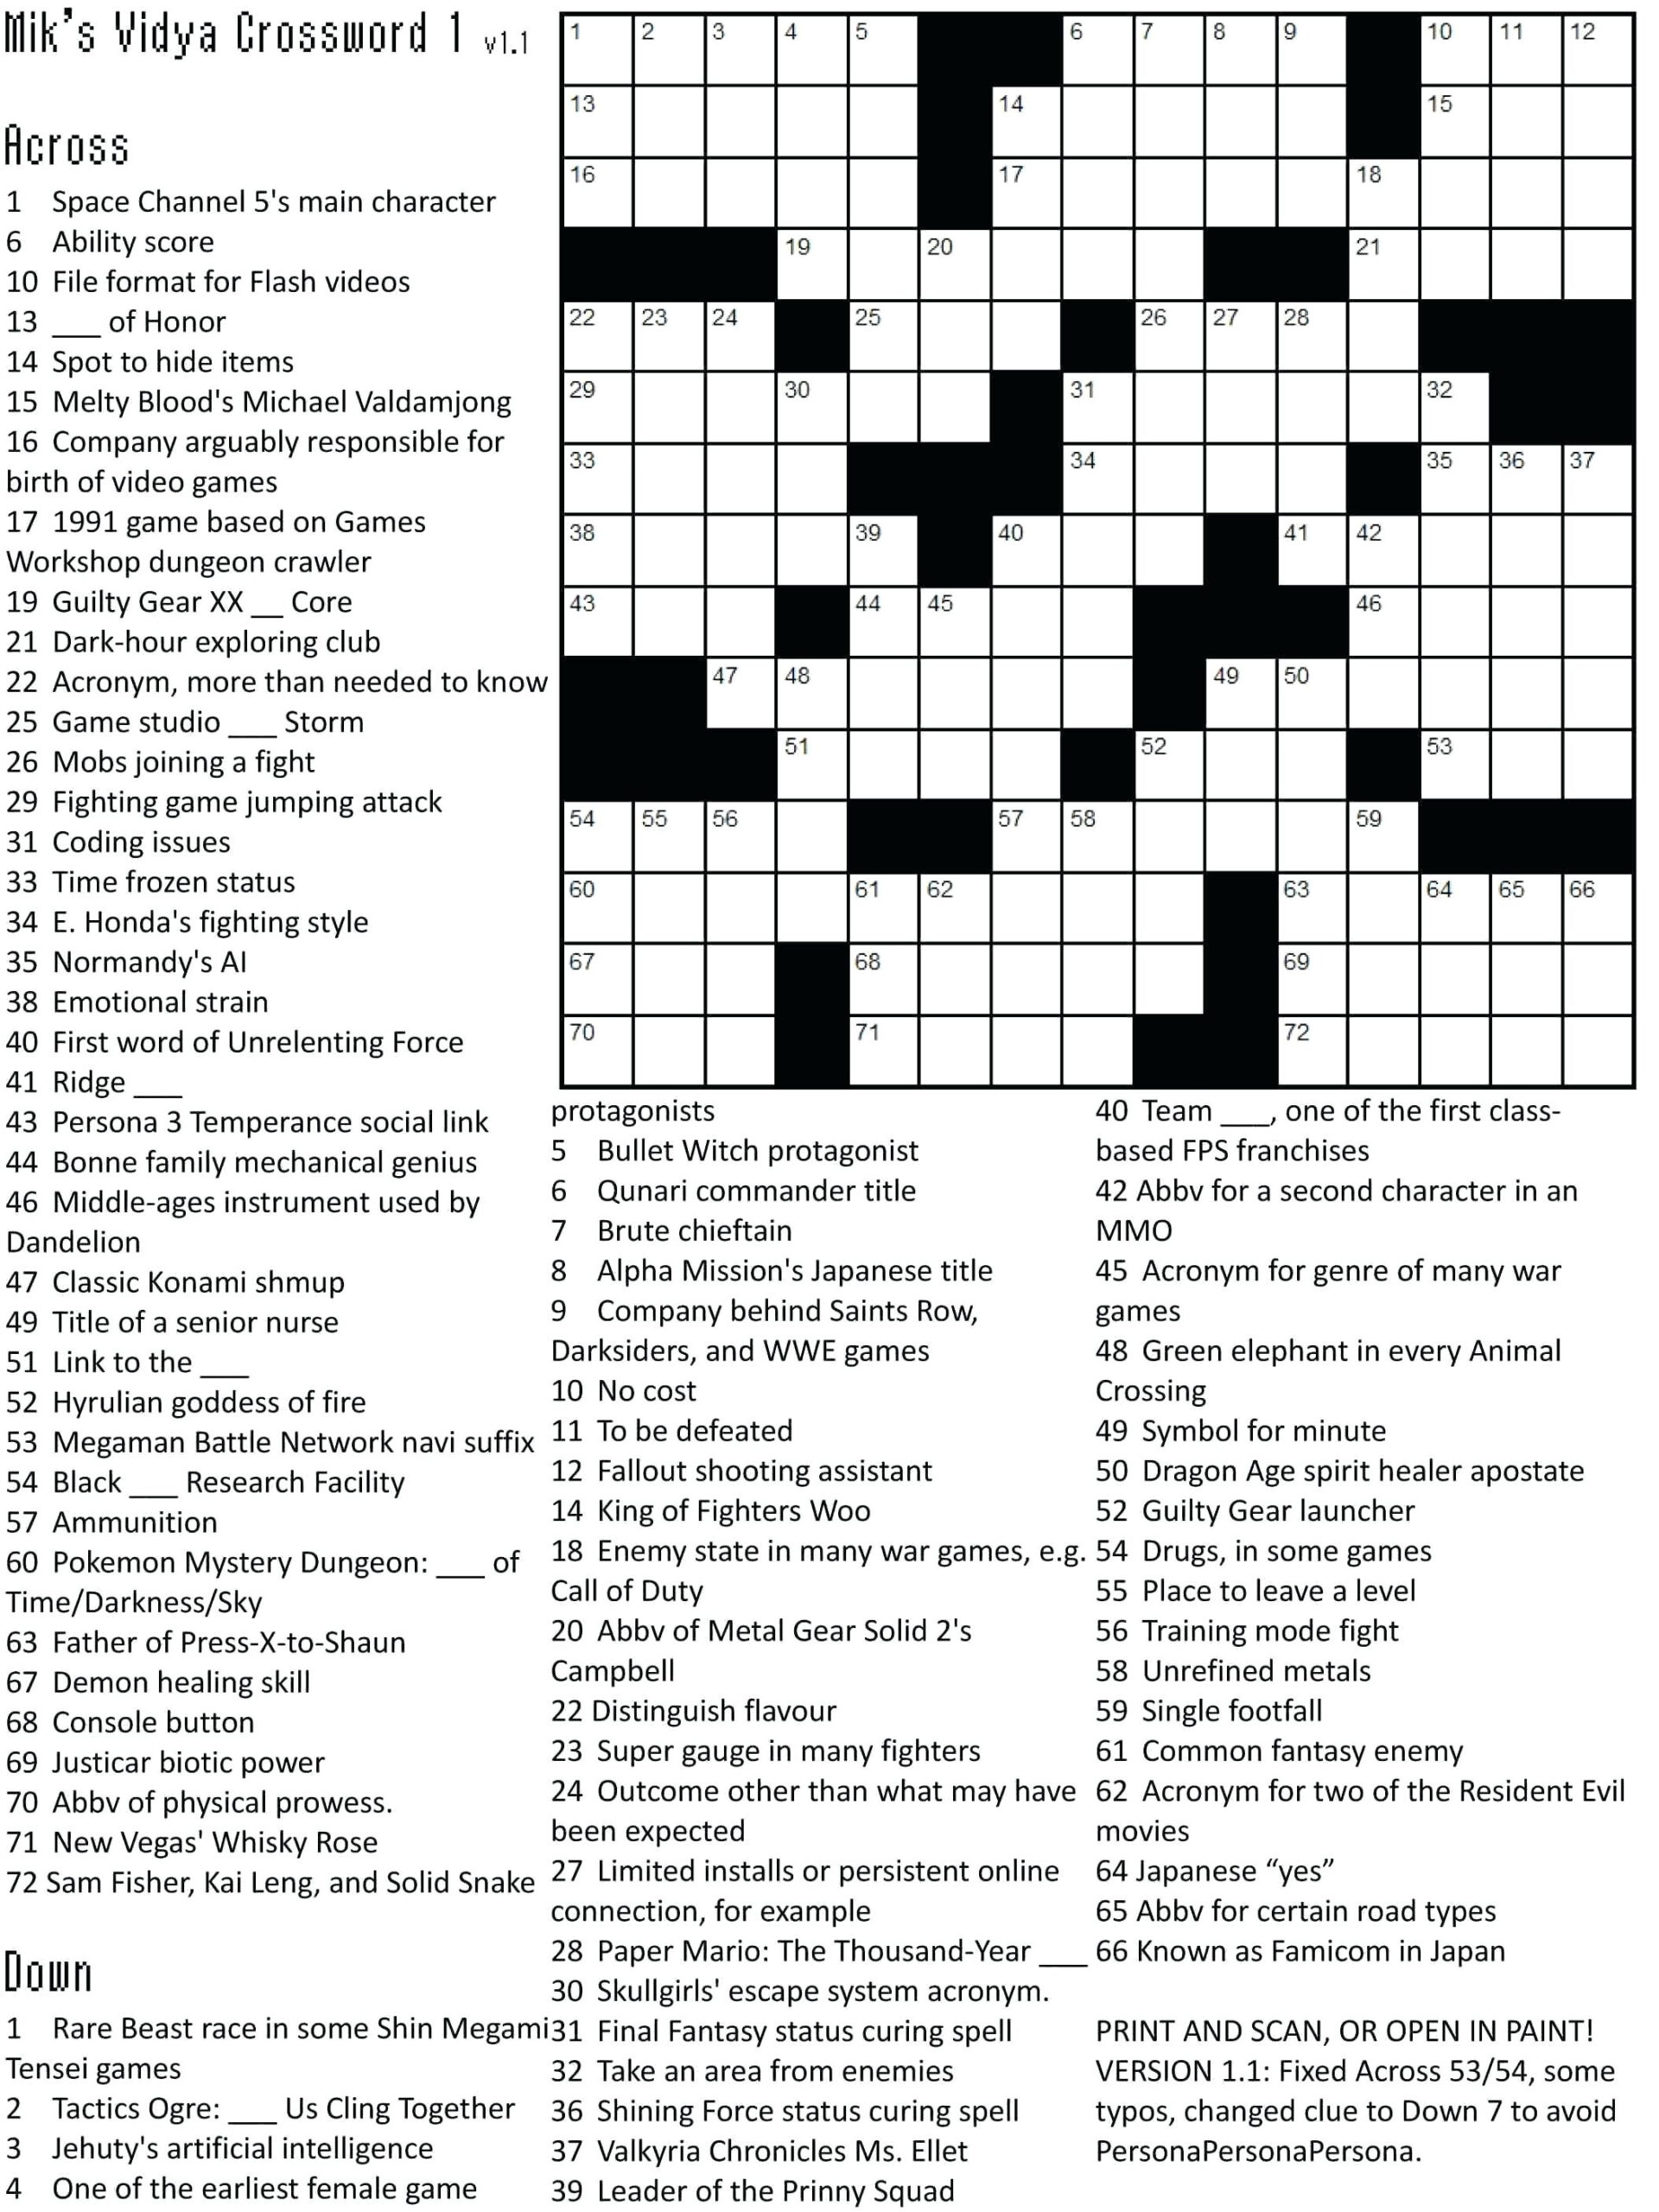 Free Printable Themed Crossword Puzzles Myheartbeats club Free 